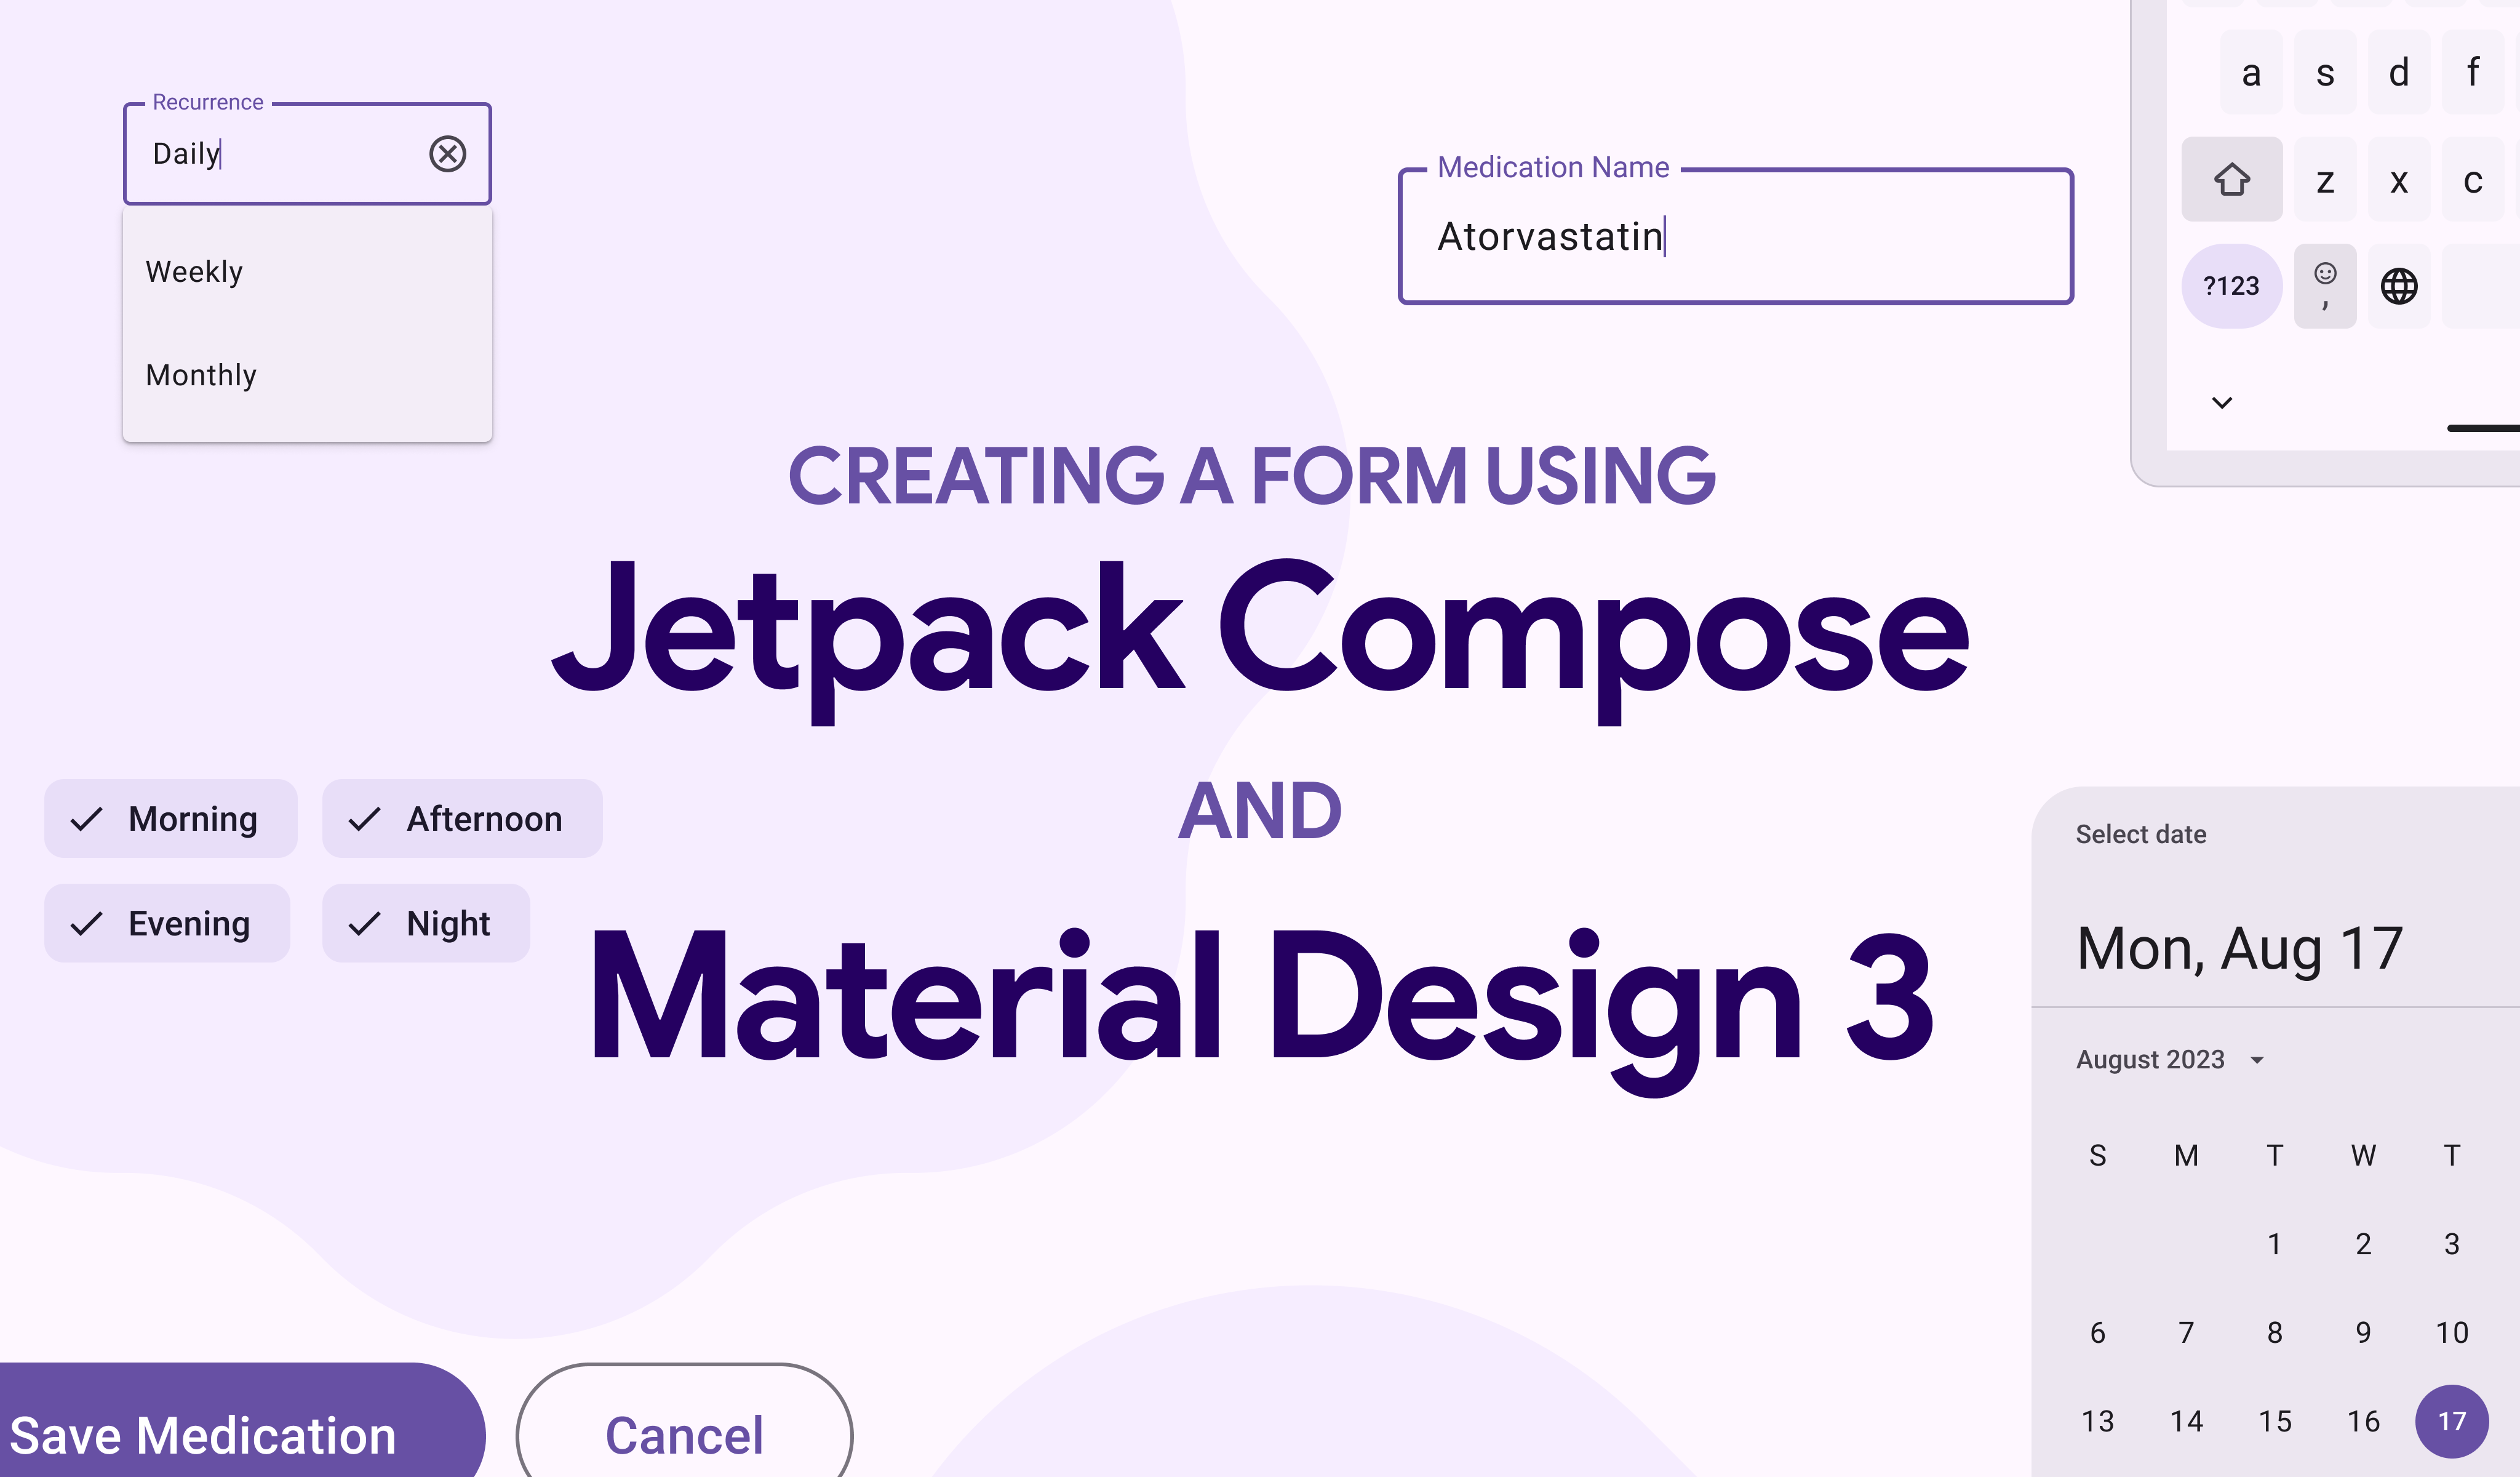 Shapes in Jetpack Compose. Jetpack Compose provides various tools